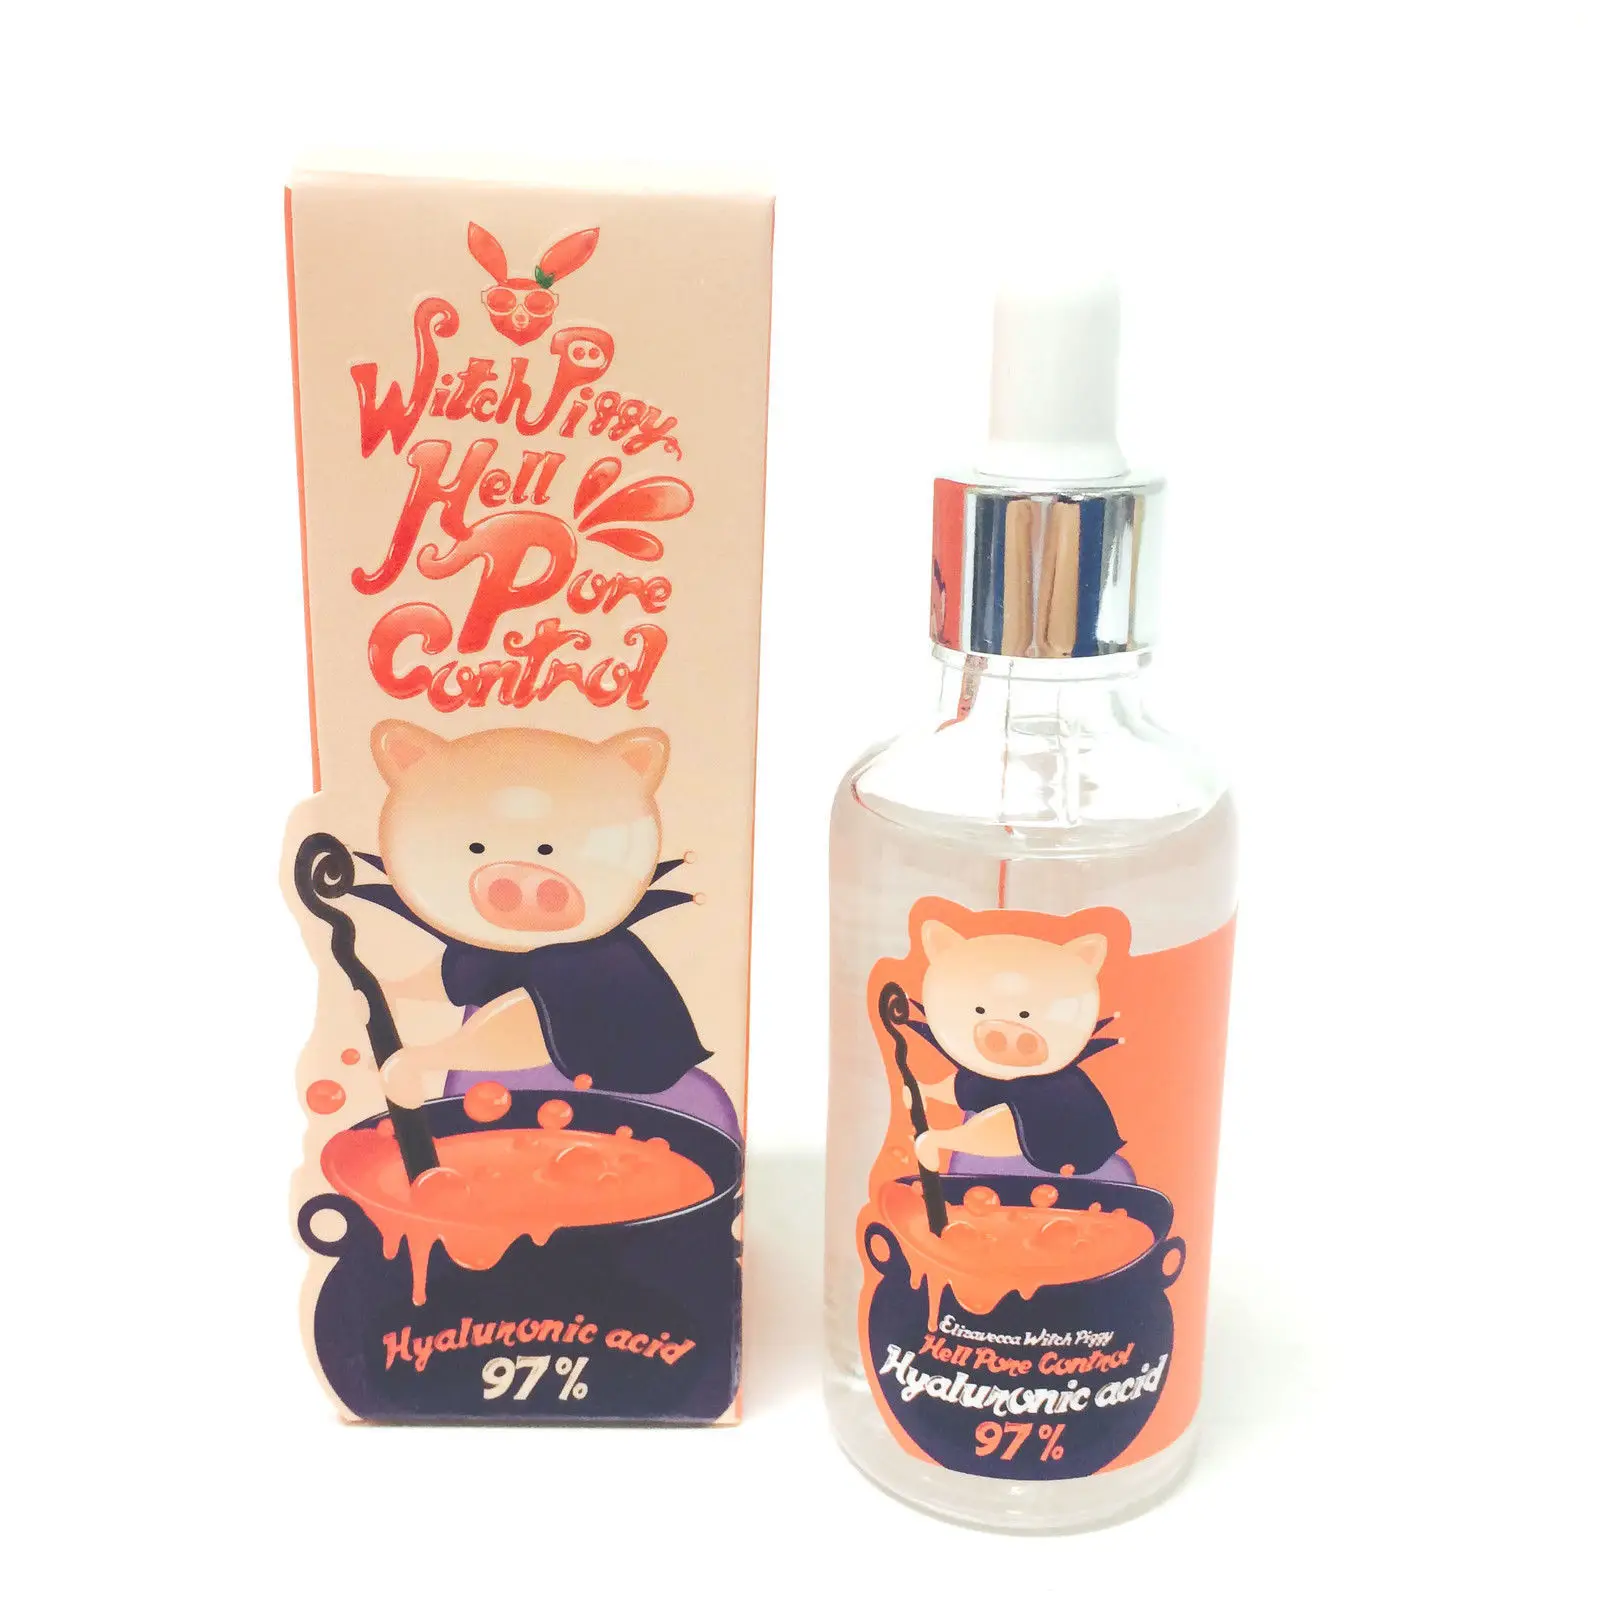 Korean Cosmetic Witch Piggy Hell Pore Control Hyaluronic Acid 97% Face Serum Crean Skin Care Facial Essence50ml